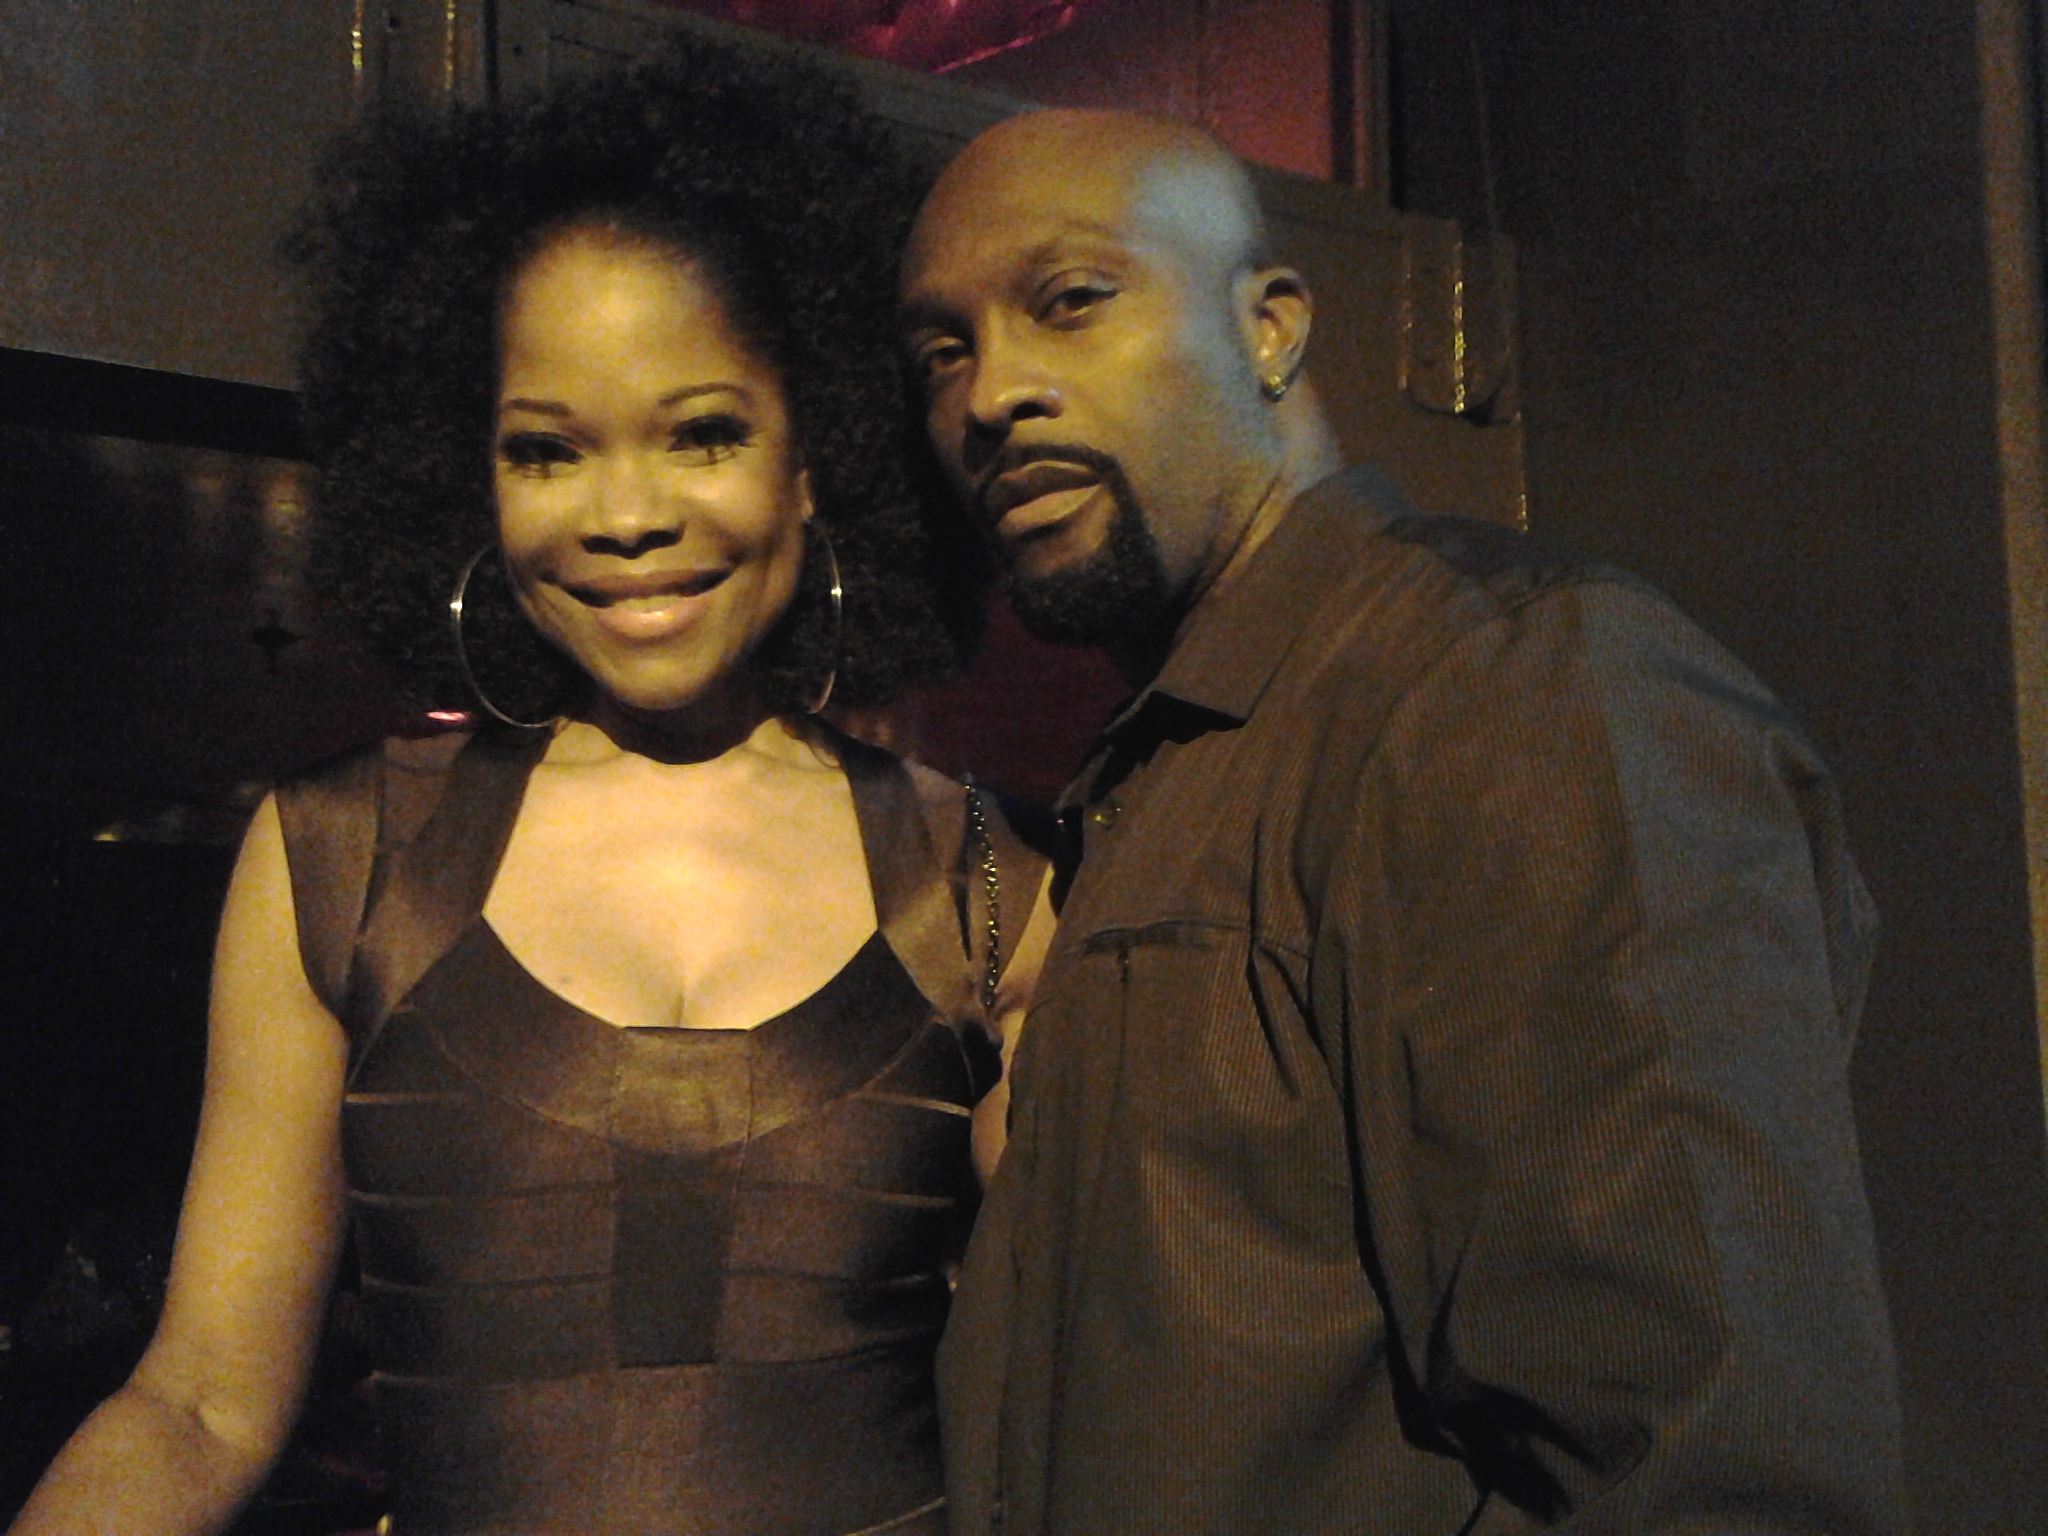 Ro Brooks and Angela Robinson at the Wrap Party for The Haves and the Have Nots.